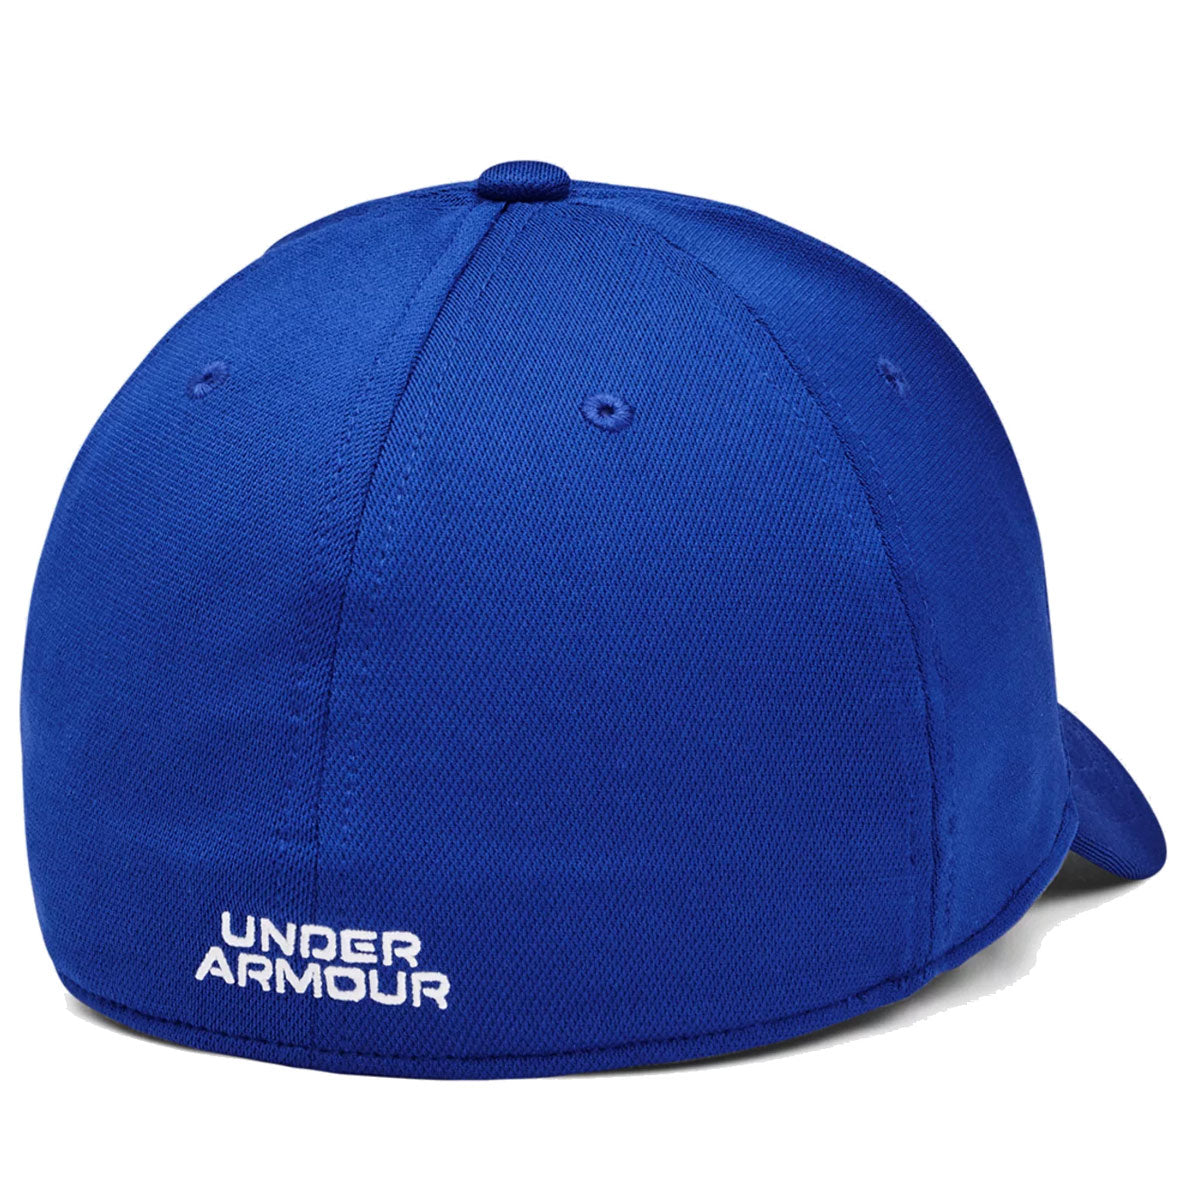 Under Armour Blitzing Hat - Adult - Royal/White